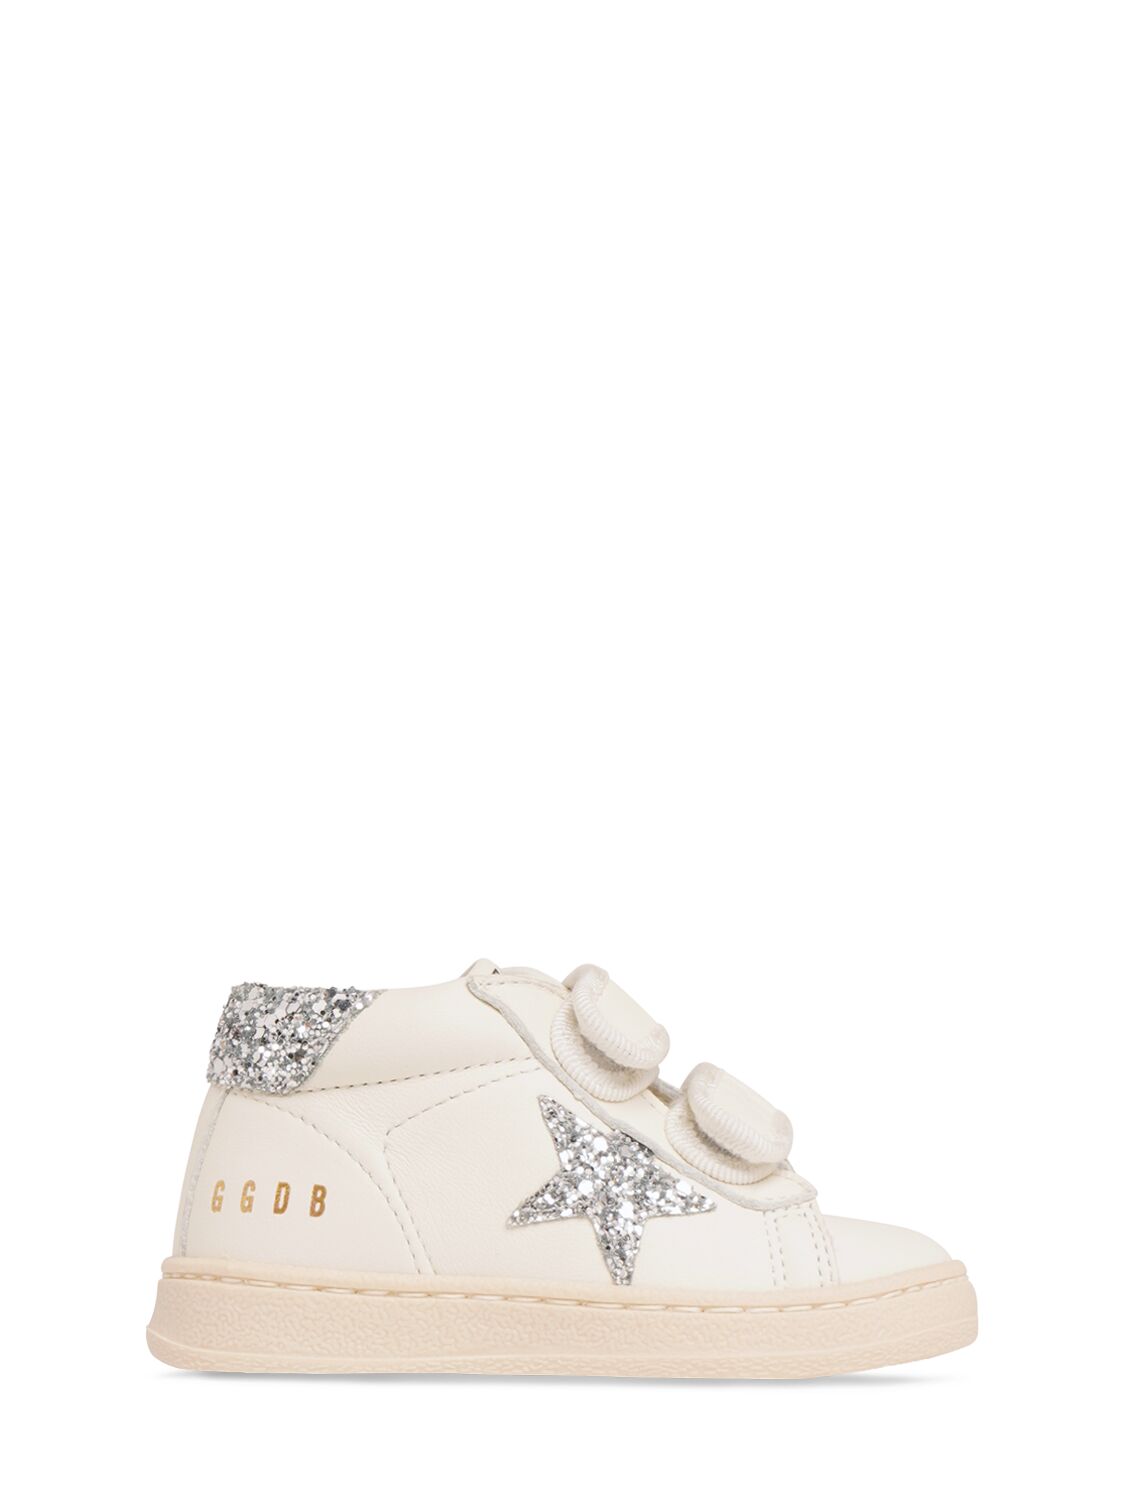 Golden Goose Kids' June Glitter Star Strap Leather Trainers In White,silver